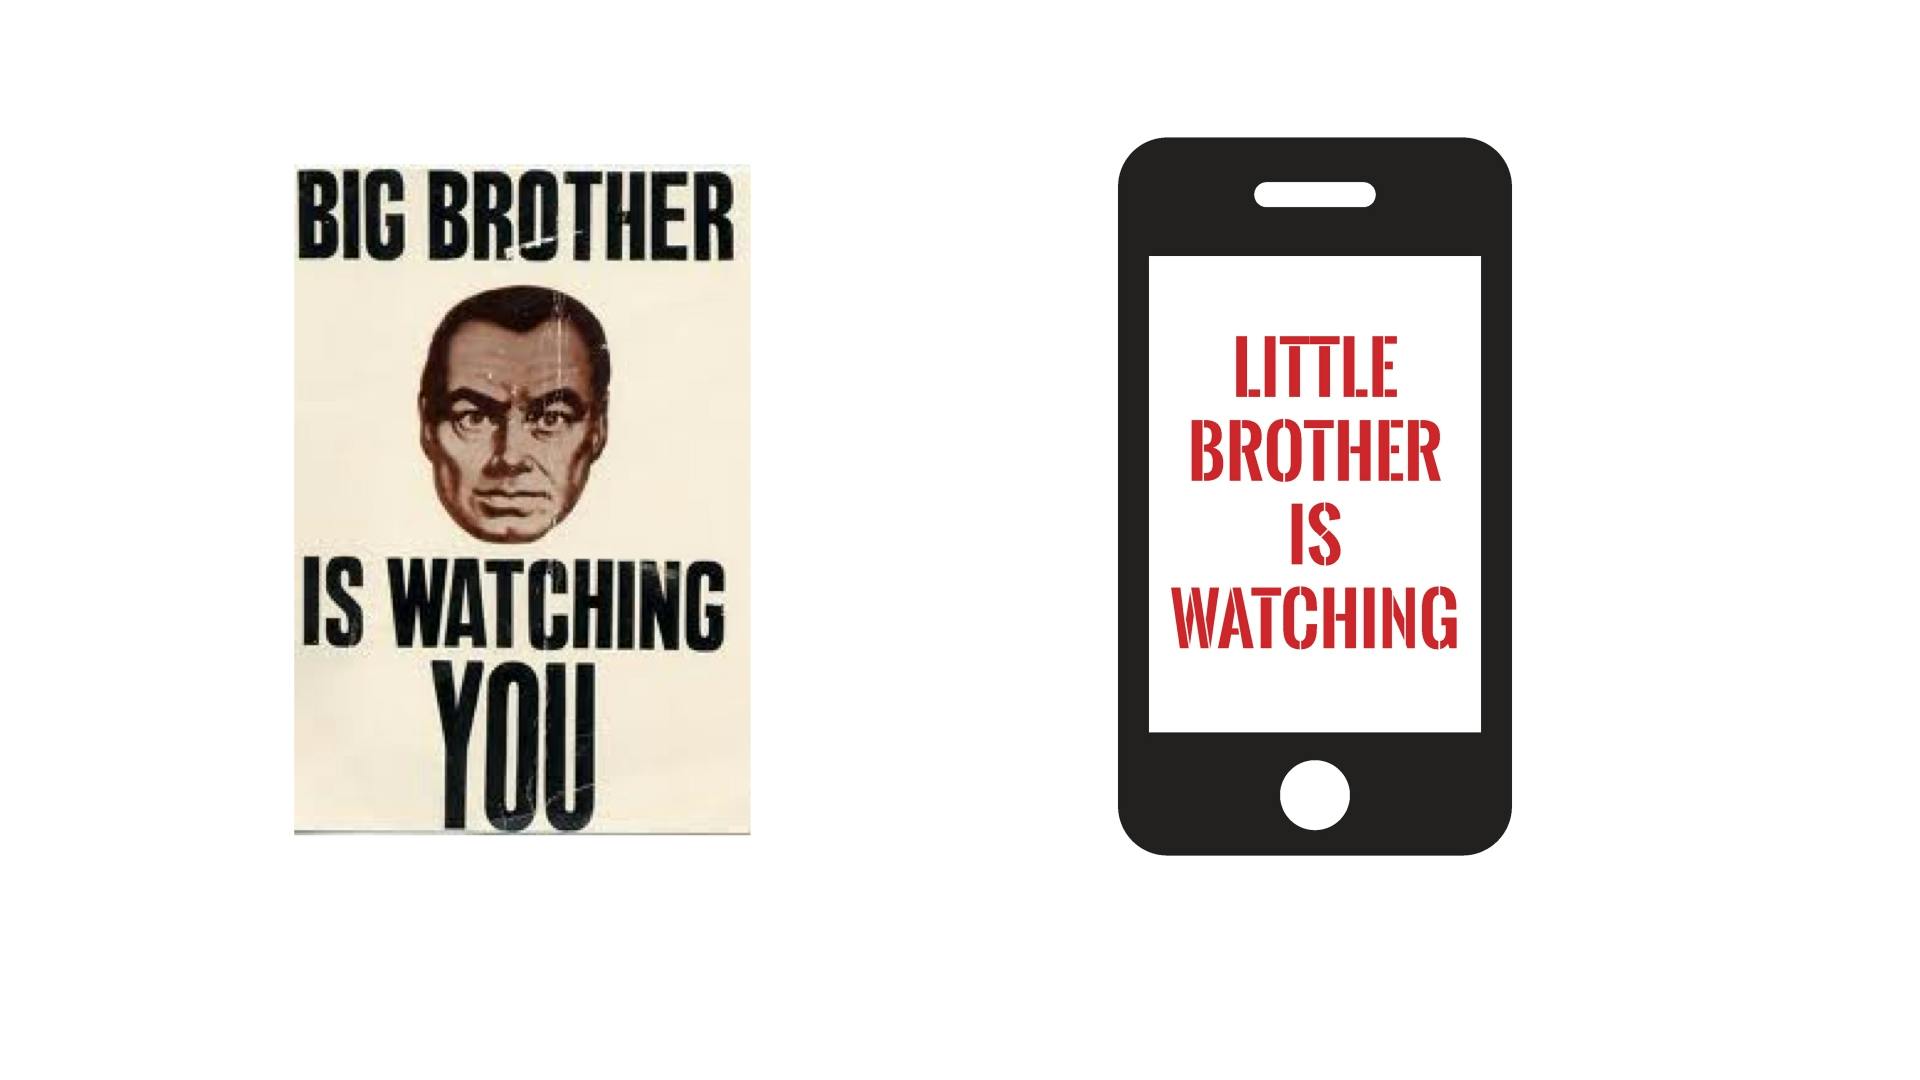 Big brother is watching you poster, Little brother is watching on cell phone 